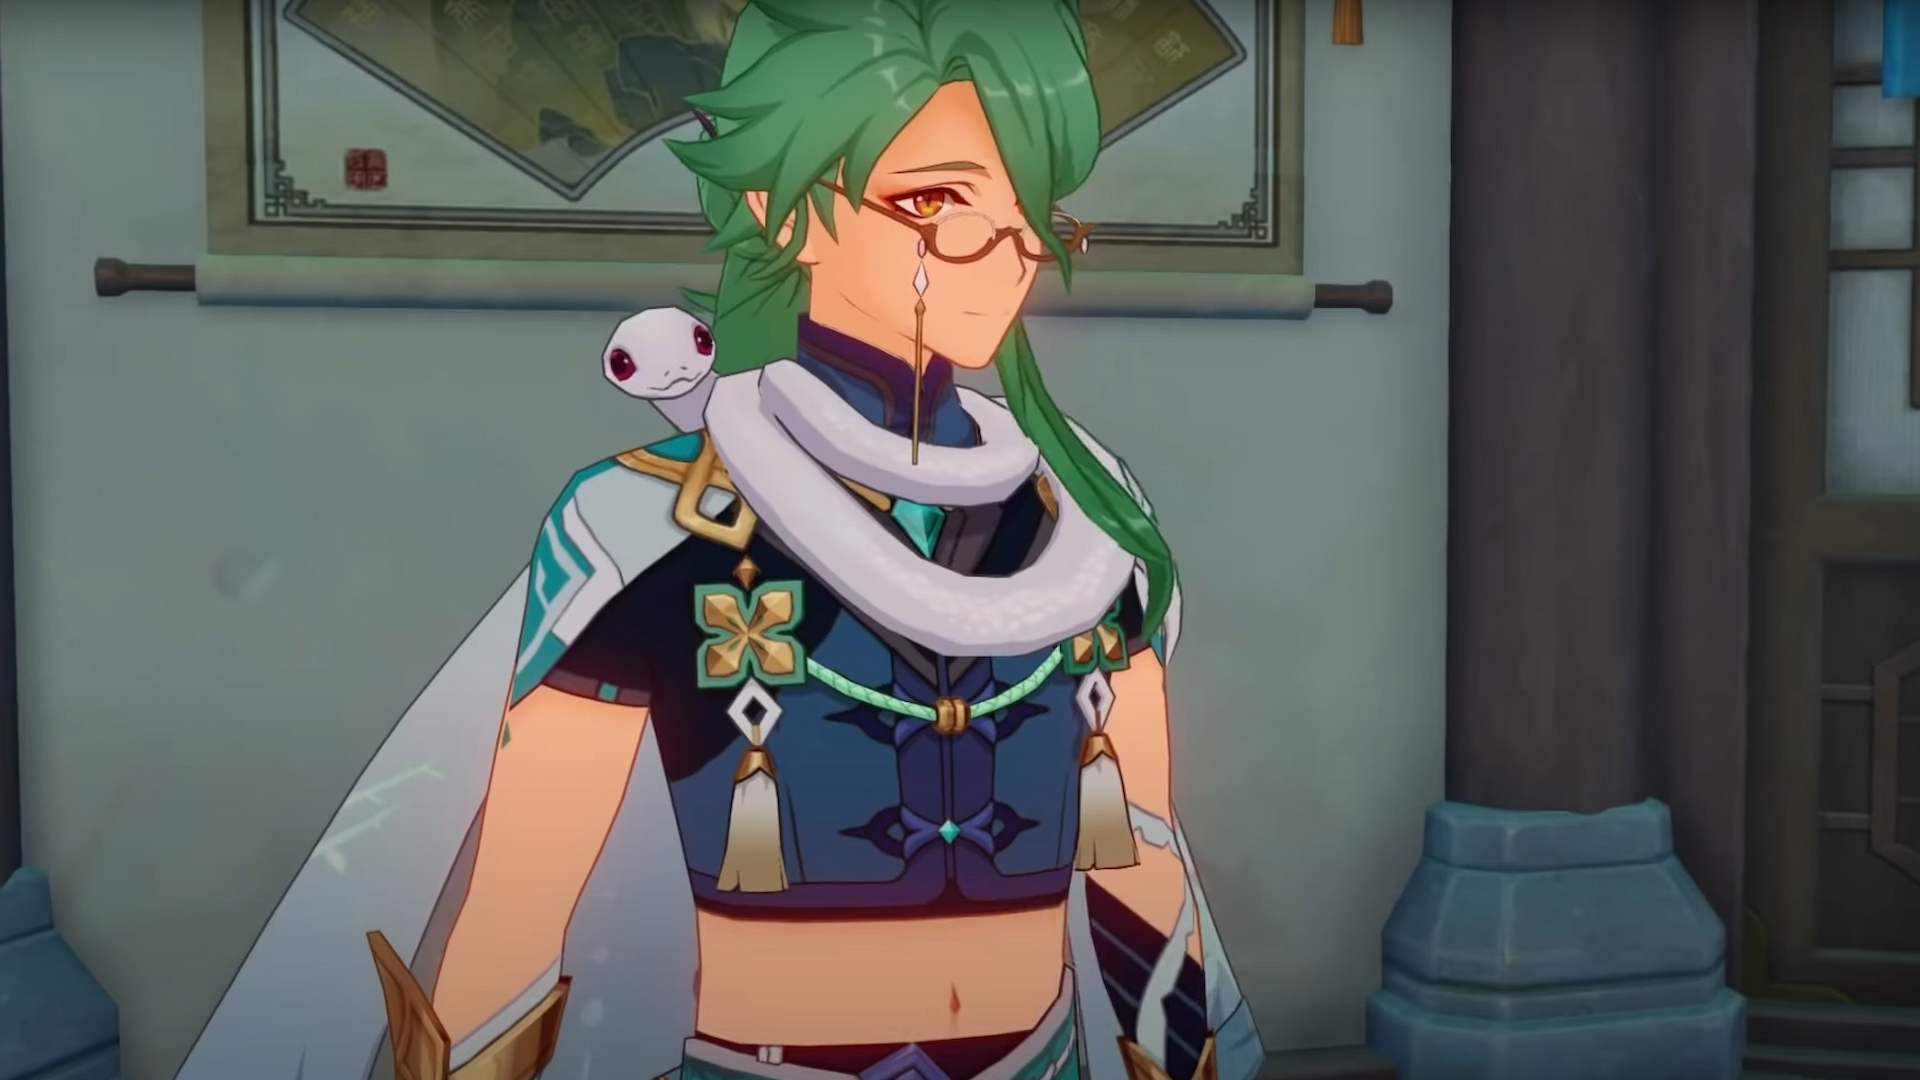 Genshin Impact leaks say Baizhu isn't a healer, despite being a doctor: anime man with green hair and white snake